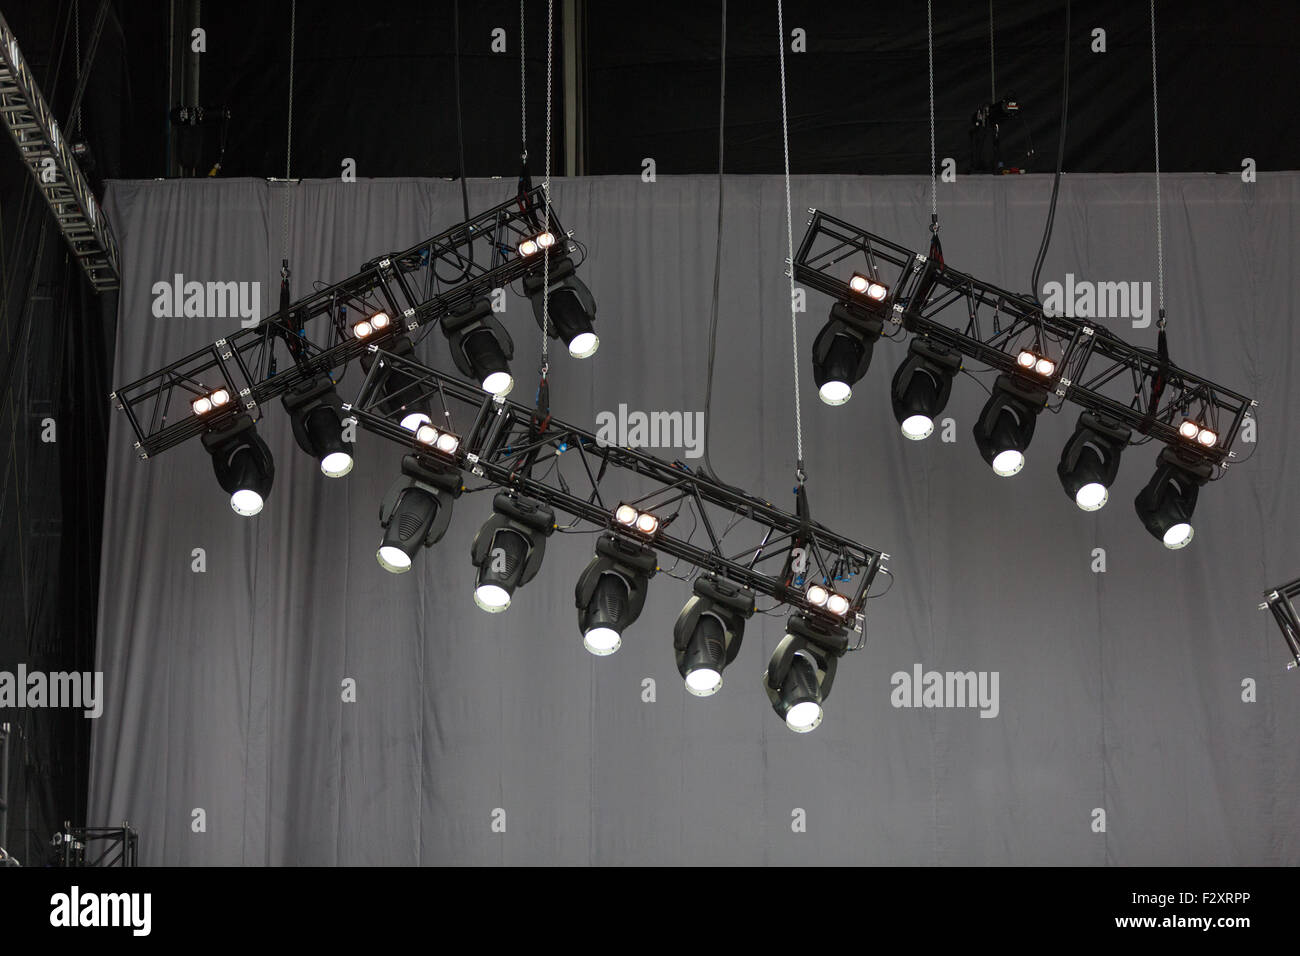 A lighting rig above stage Stock Photo - Alamy